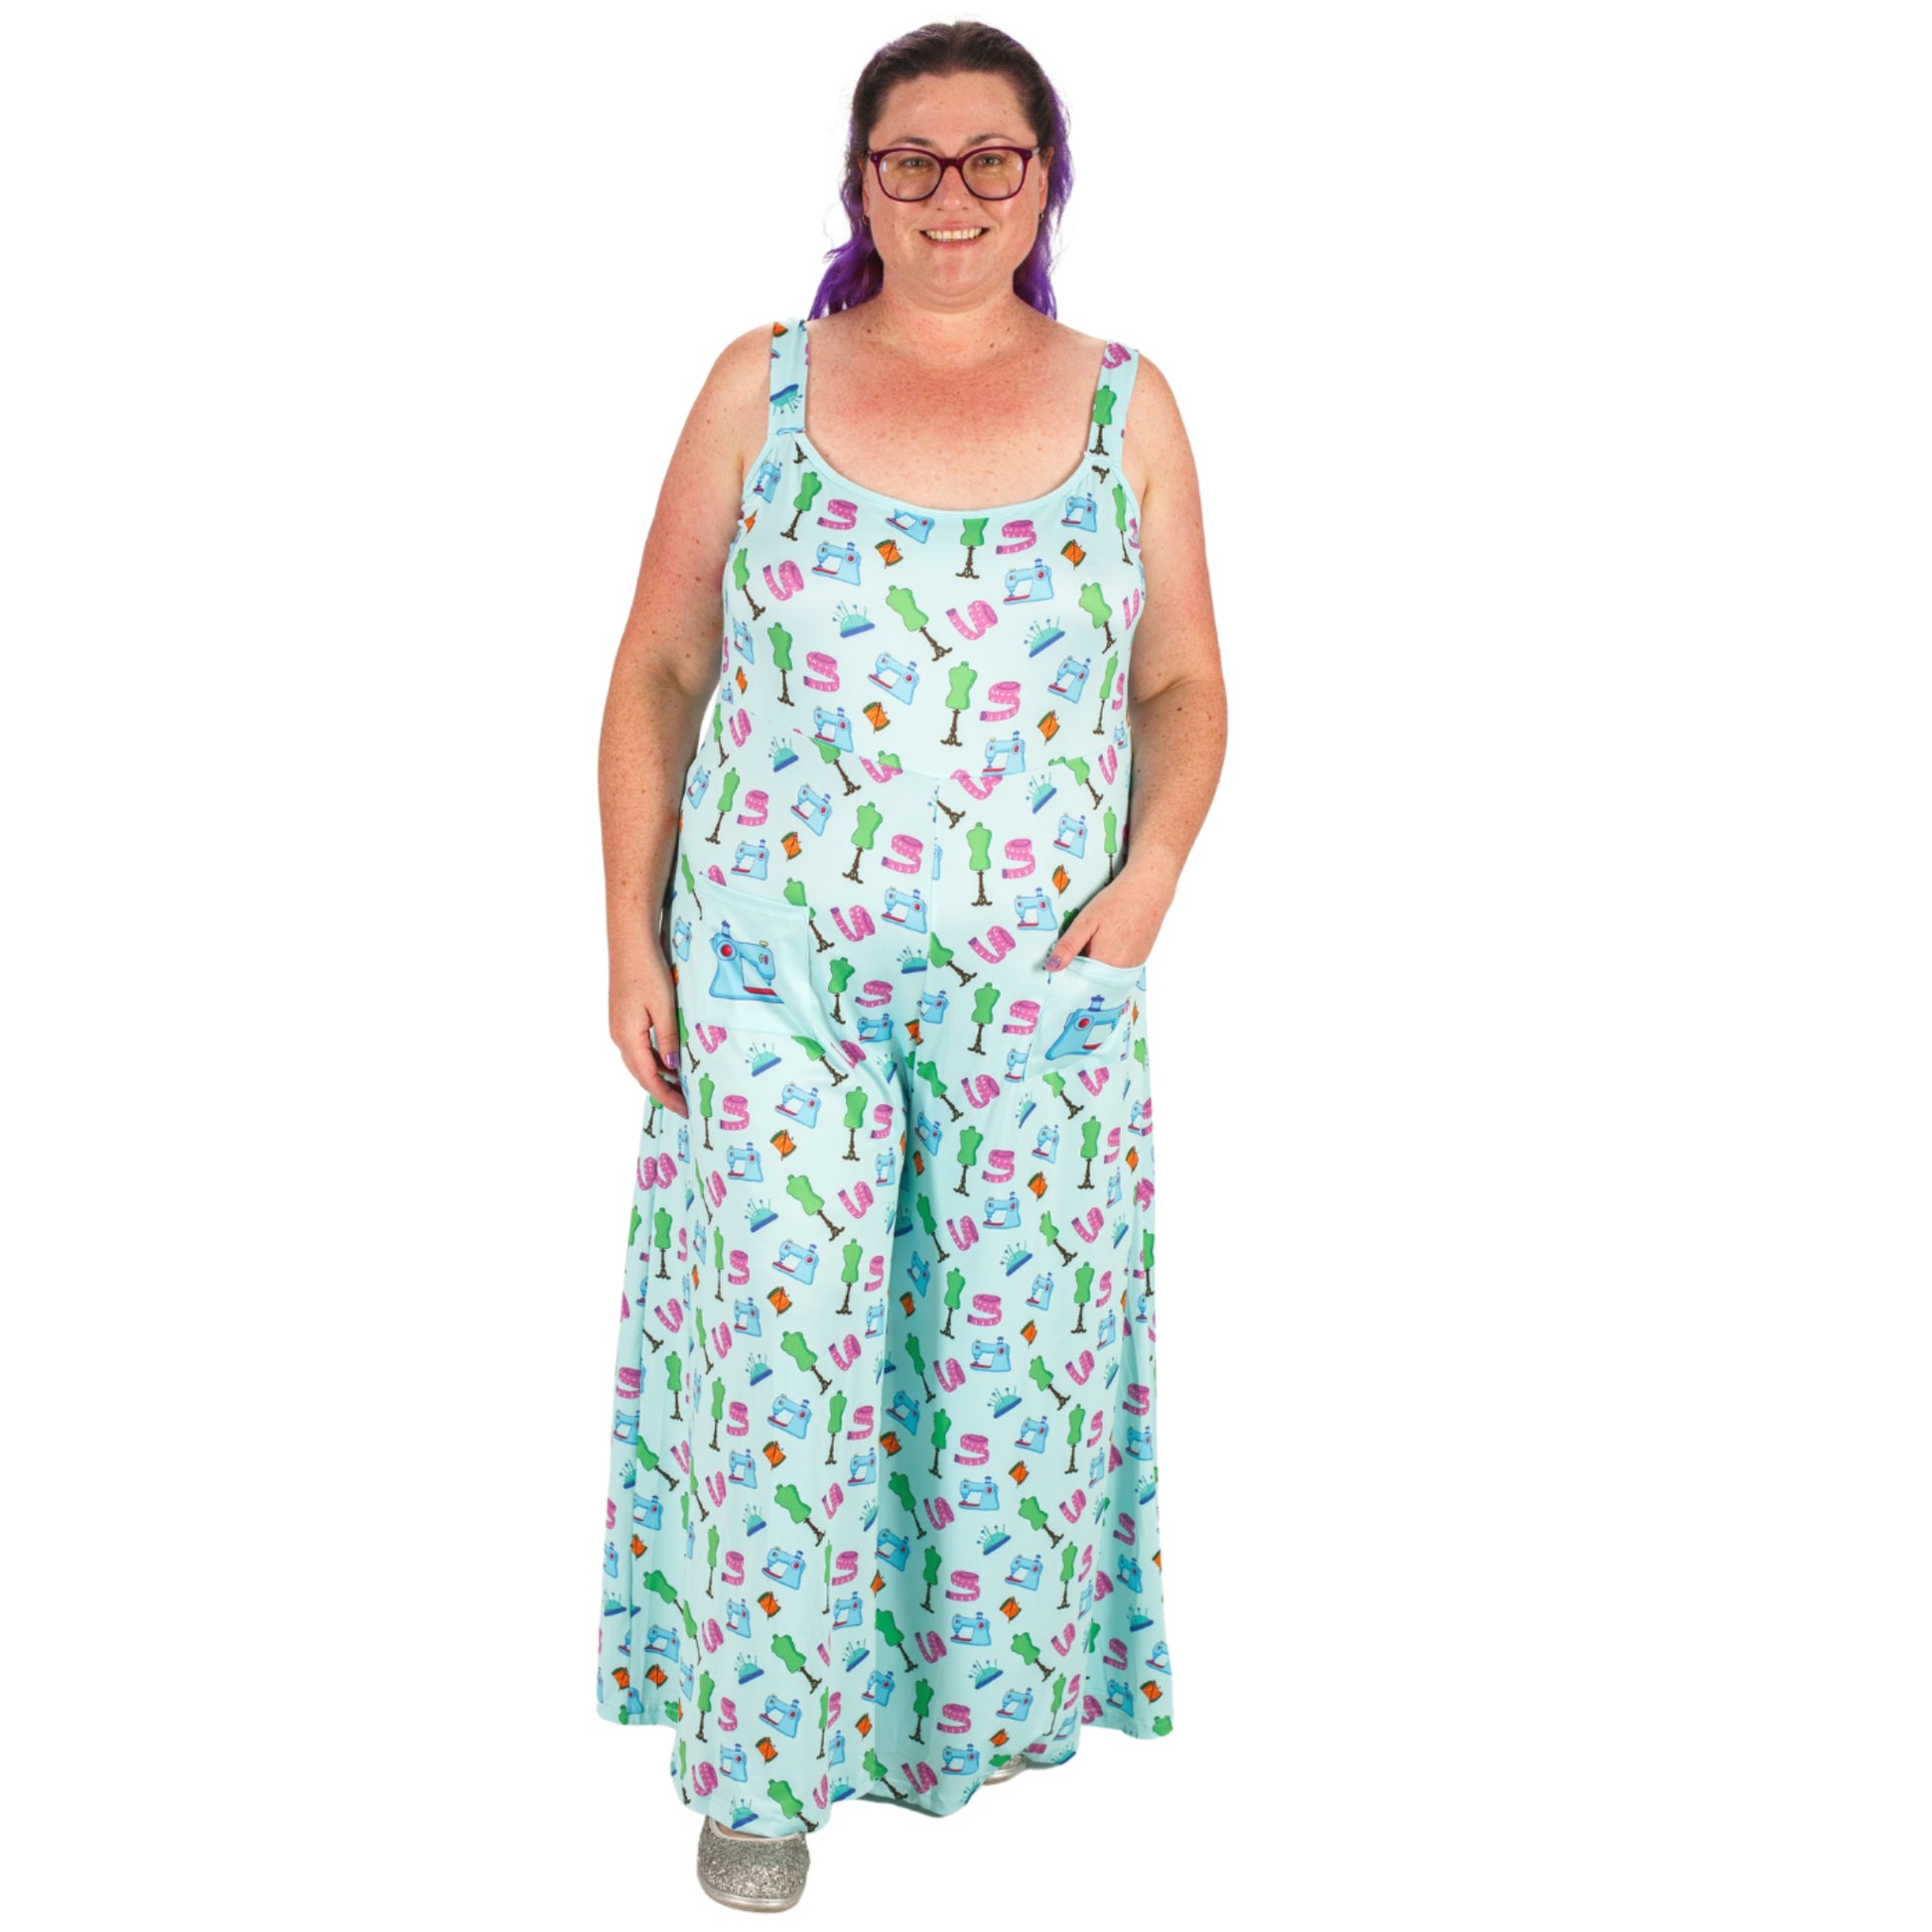 Haberdashery Jumpsuit by RainbowsAndFairies.com.au (Sewing - Dressmaking - Overalls - Wide Leg Pants - Kitsch - Rockabilly) - SKU: CL_JUMPS_HABER_ORG - Pic-05